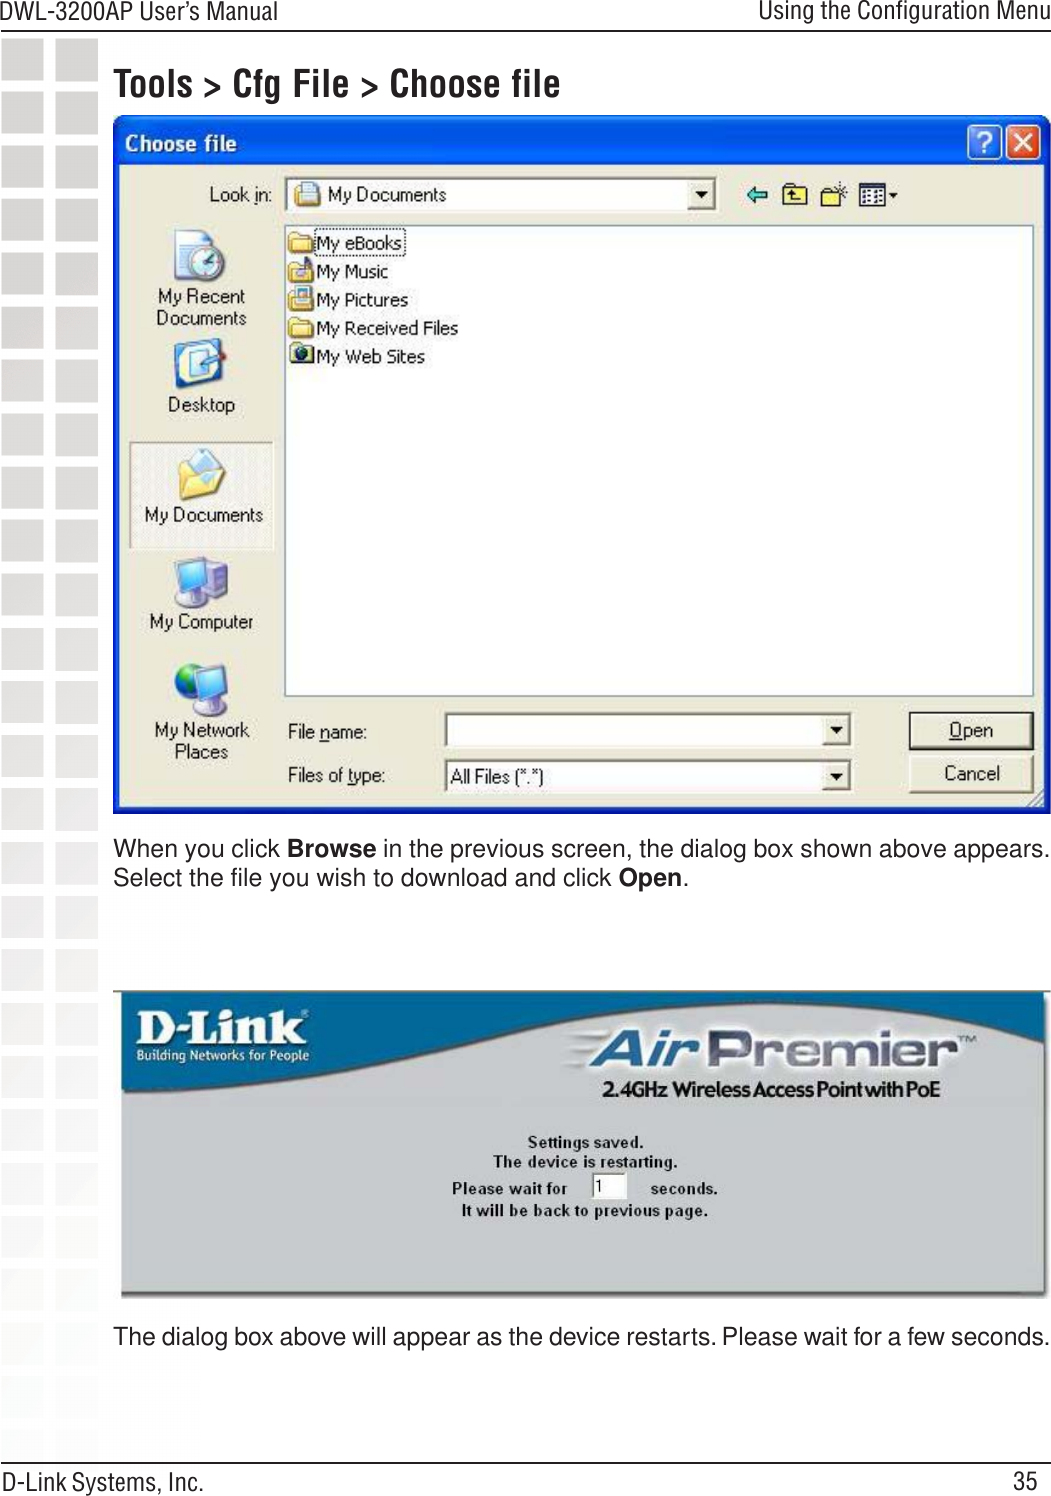 35DWL-3200AP User’s ManualD-Link Systems, Inc.Tools &gt; Cfg File &gt; Choose fileWhen you click Browse in the previous screen, the dialog box shown above appears.Select the file you wish to download and click Open.The dialog box above will appear as the device restarts. Please wait for a few seconds.Using the Configuration Menu